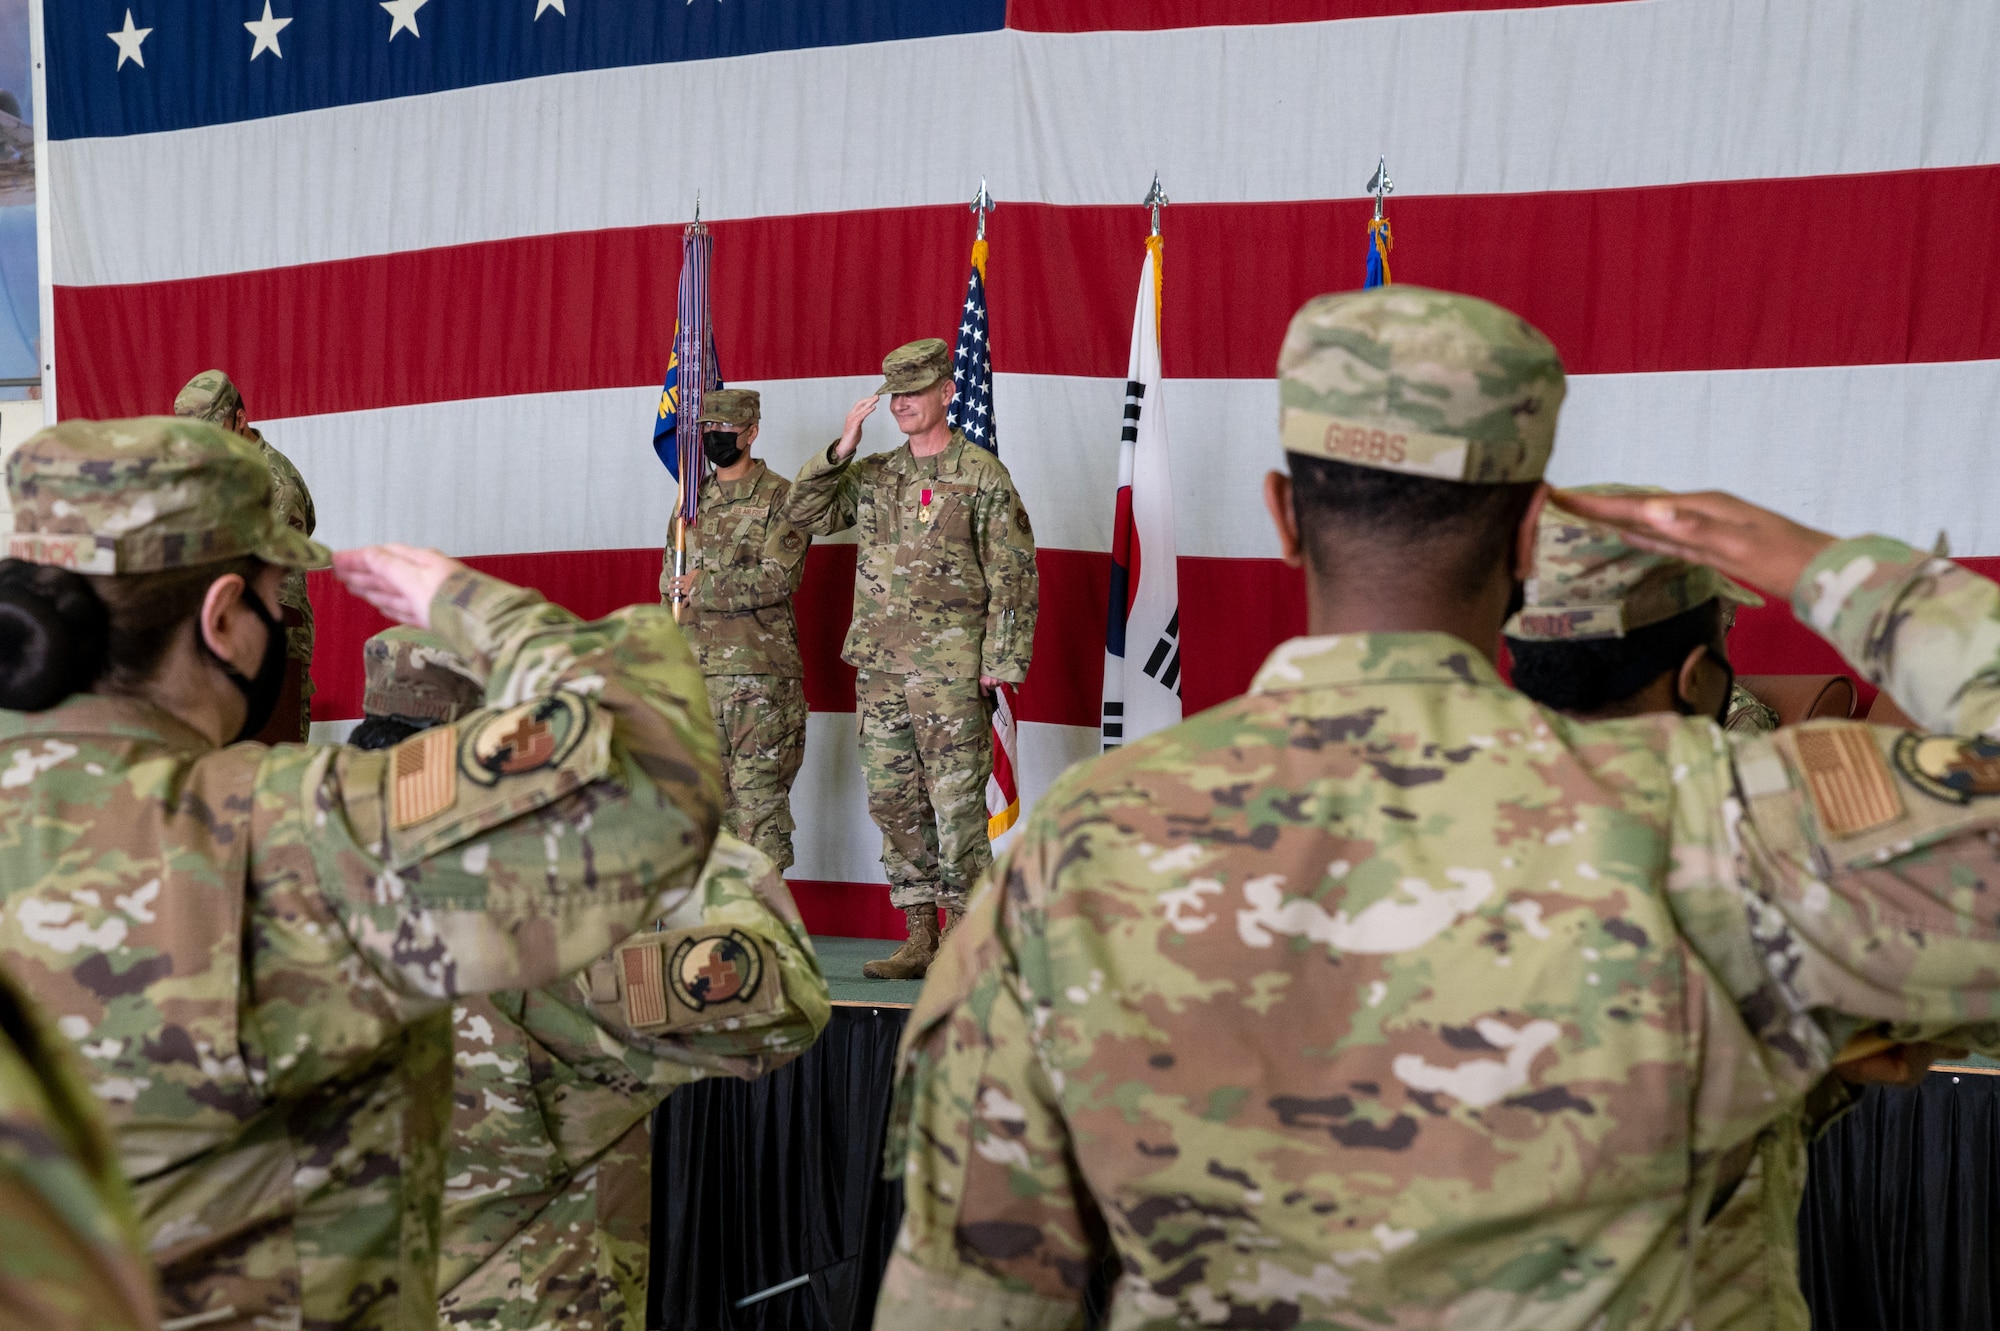 Col. Michael Fea, 51st Medical Group outgoing commander, returns a salute to his squadron during the change of command ceremony at Osan Air Base, Republic of Korea, July 12, 2021. The ceremonial passing of the guidon from Fea marks the official end of his command of the 51st MDG. (U.S. Air Force photo by Tech. Sgt. Nicholas Alder)